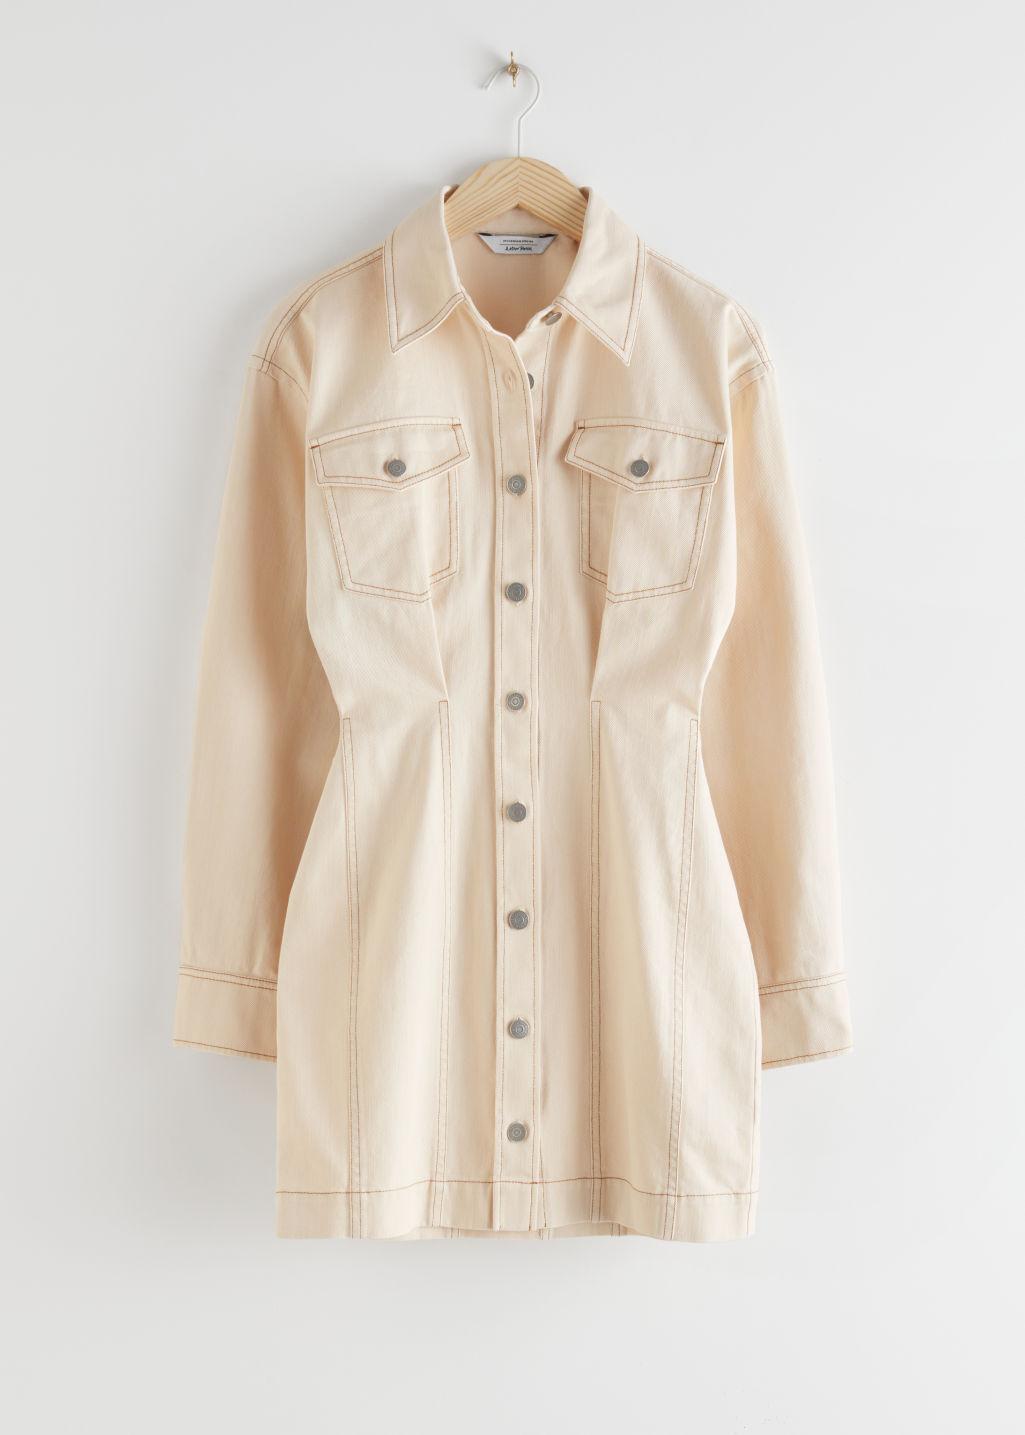 & Other Stories Hourglass Belted Denim Mini Dress in Natural | Lyst Canada